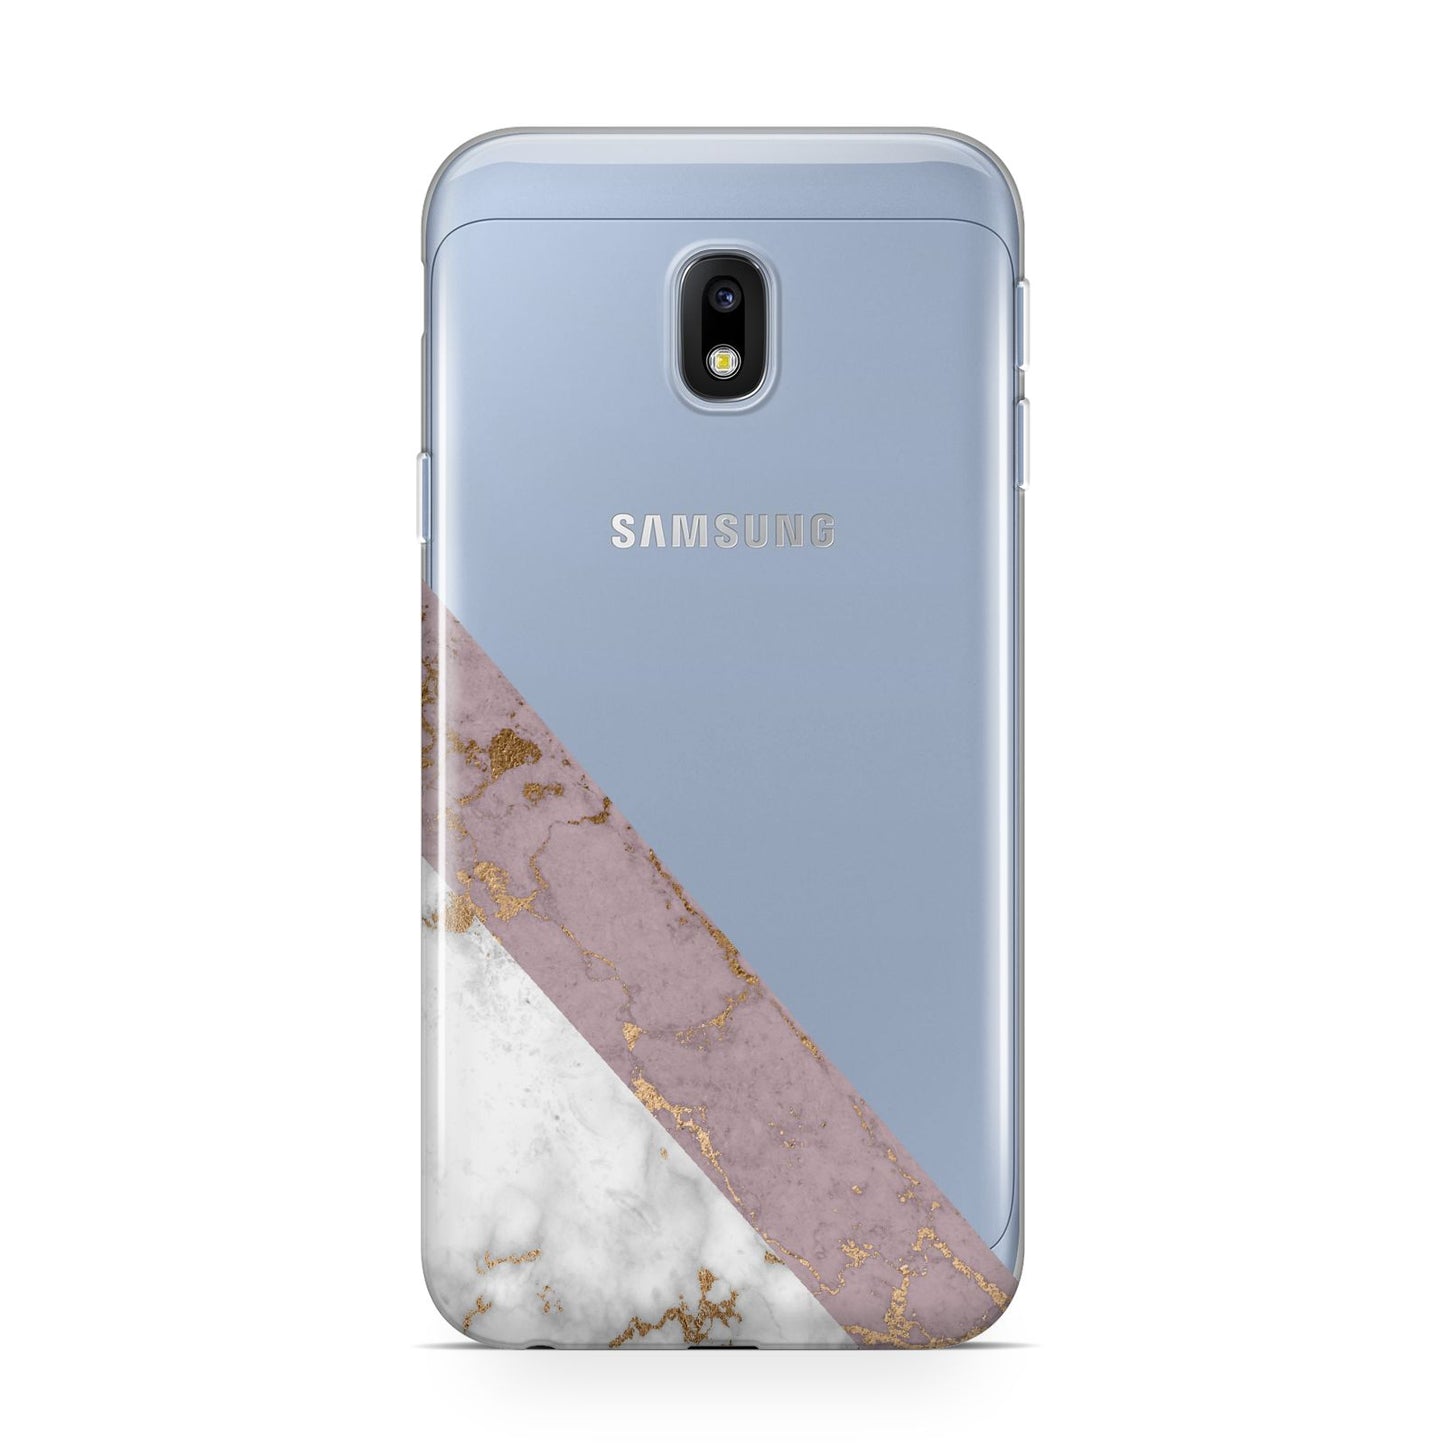 Transparent Pink and White Marble Samsung Galaxy J3 2017 Case